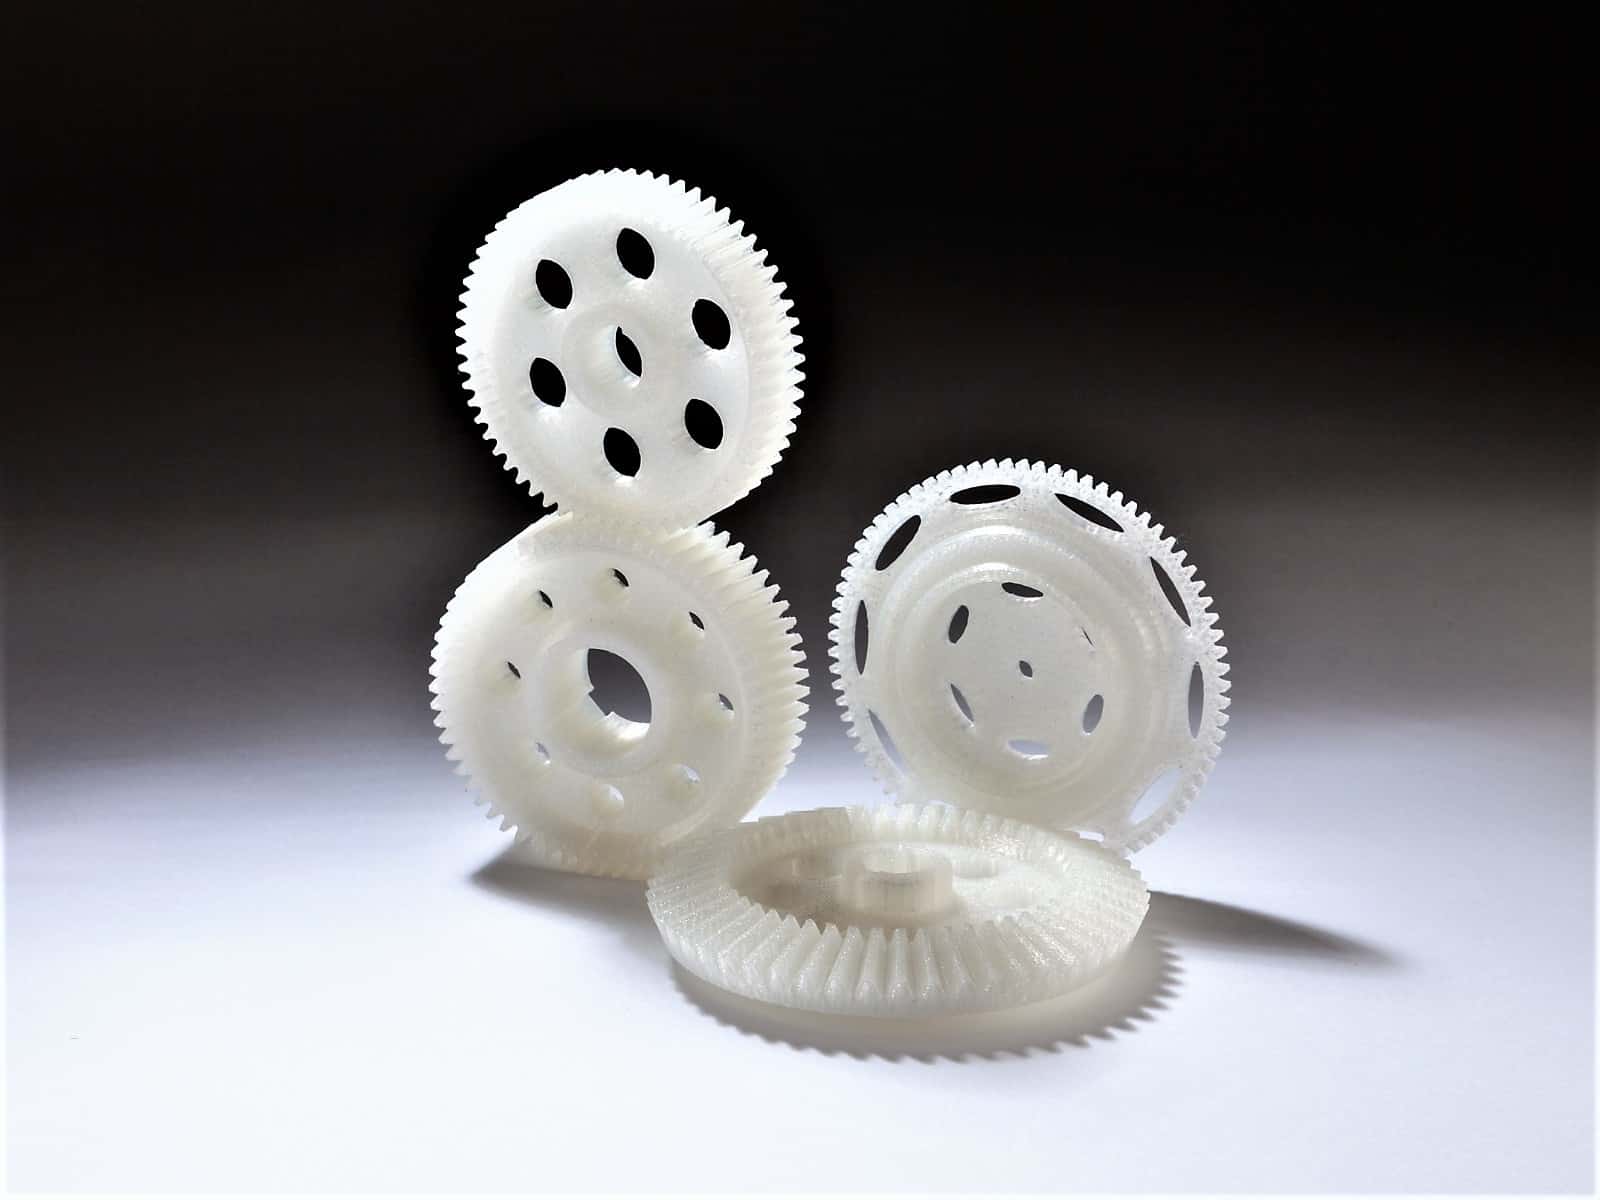 Anemone fisk Certifikat udtale 3D Printed Set of Four Small Nylon Gears - Fusion 3 Design